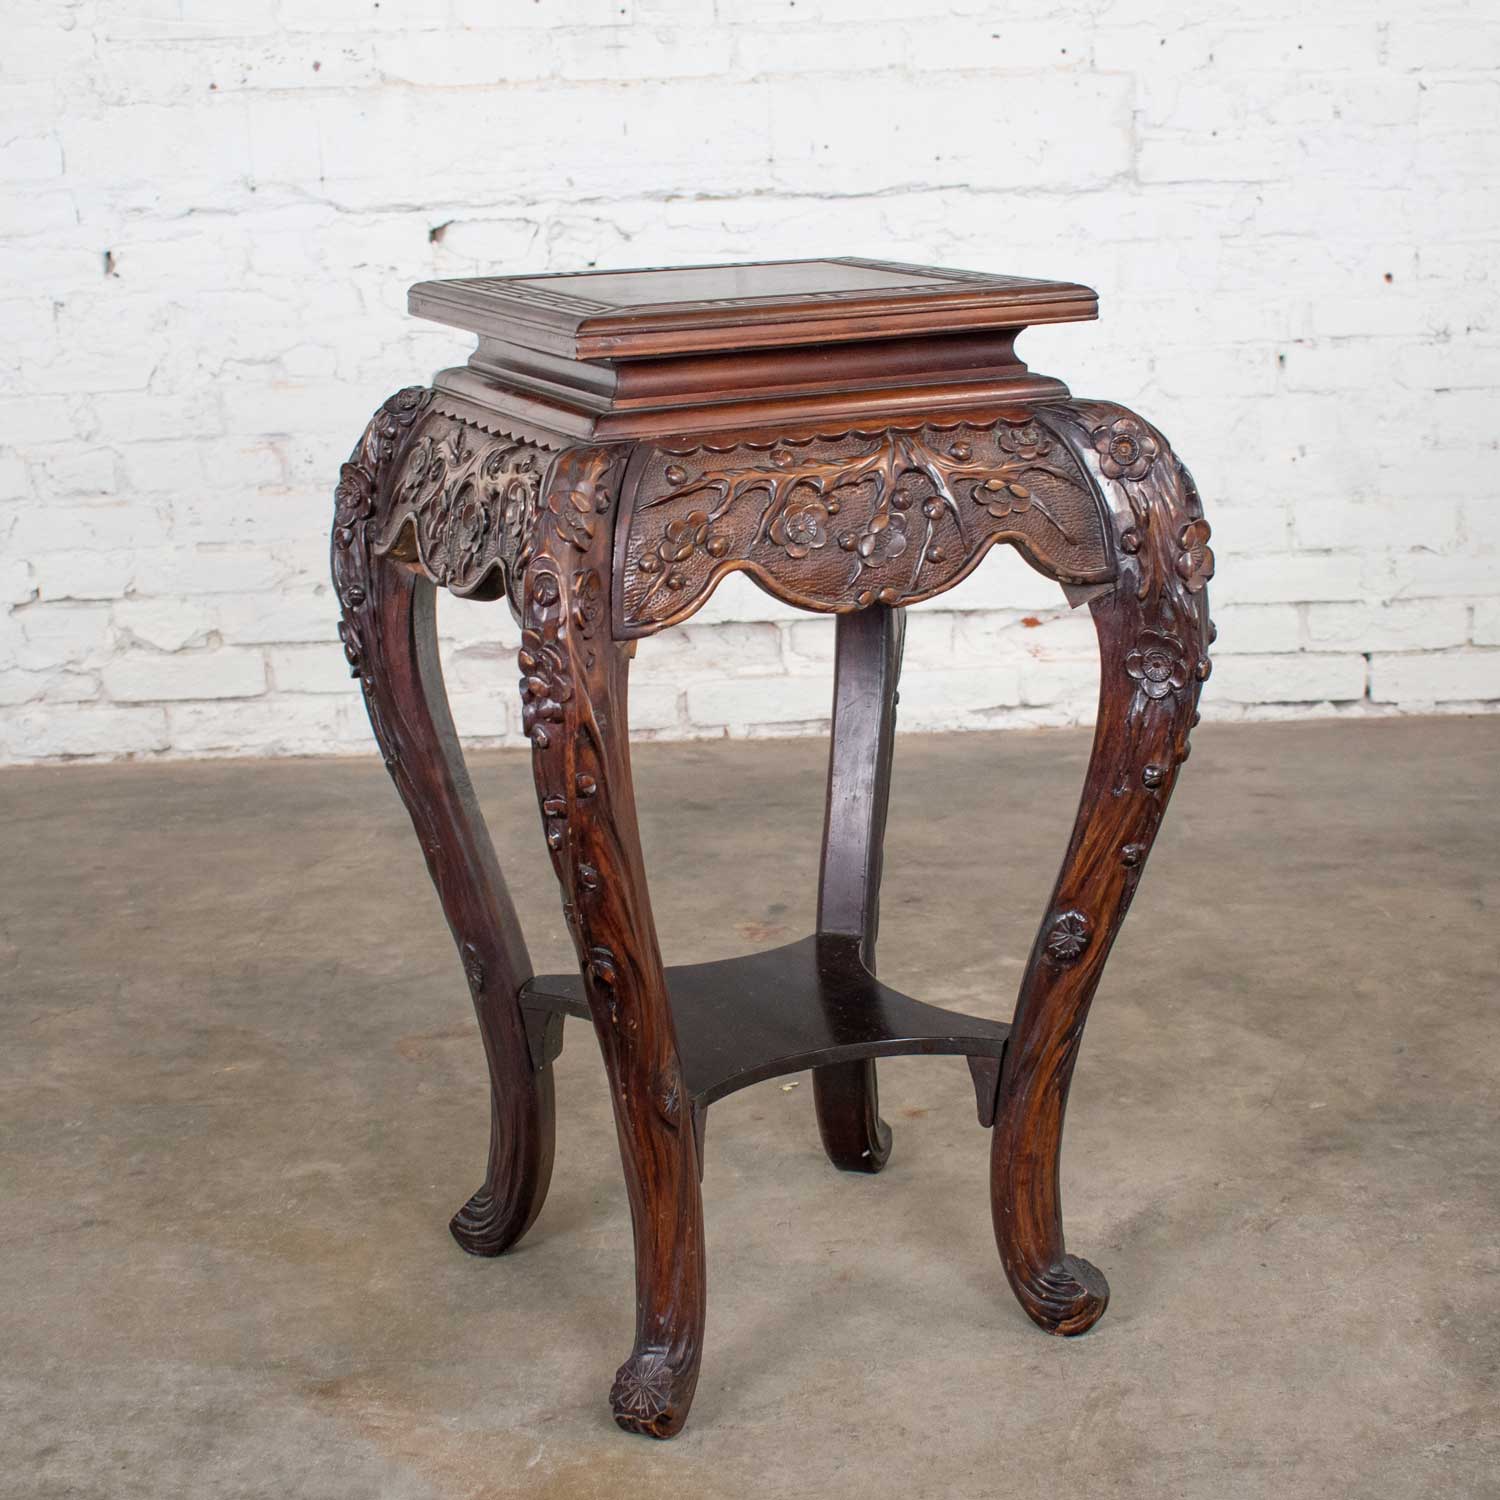 Antique Asian Pedestal Table Rosewood Color Hand Carved Cherry Blossoms